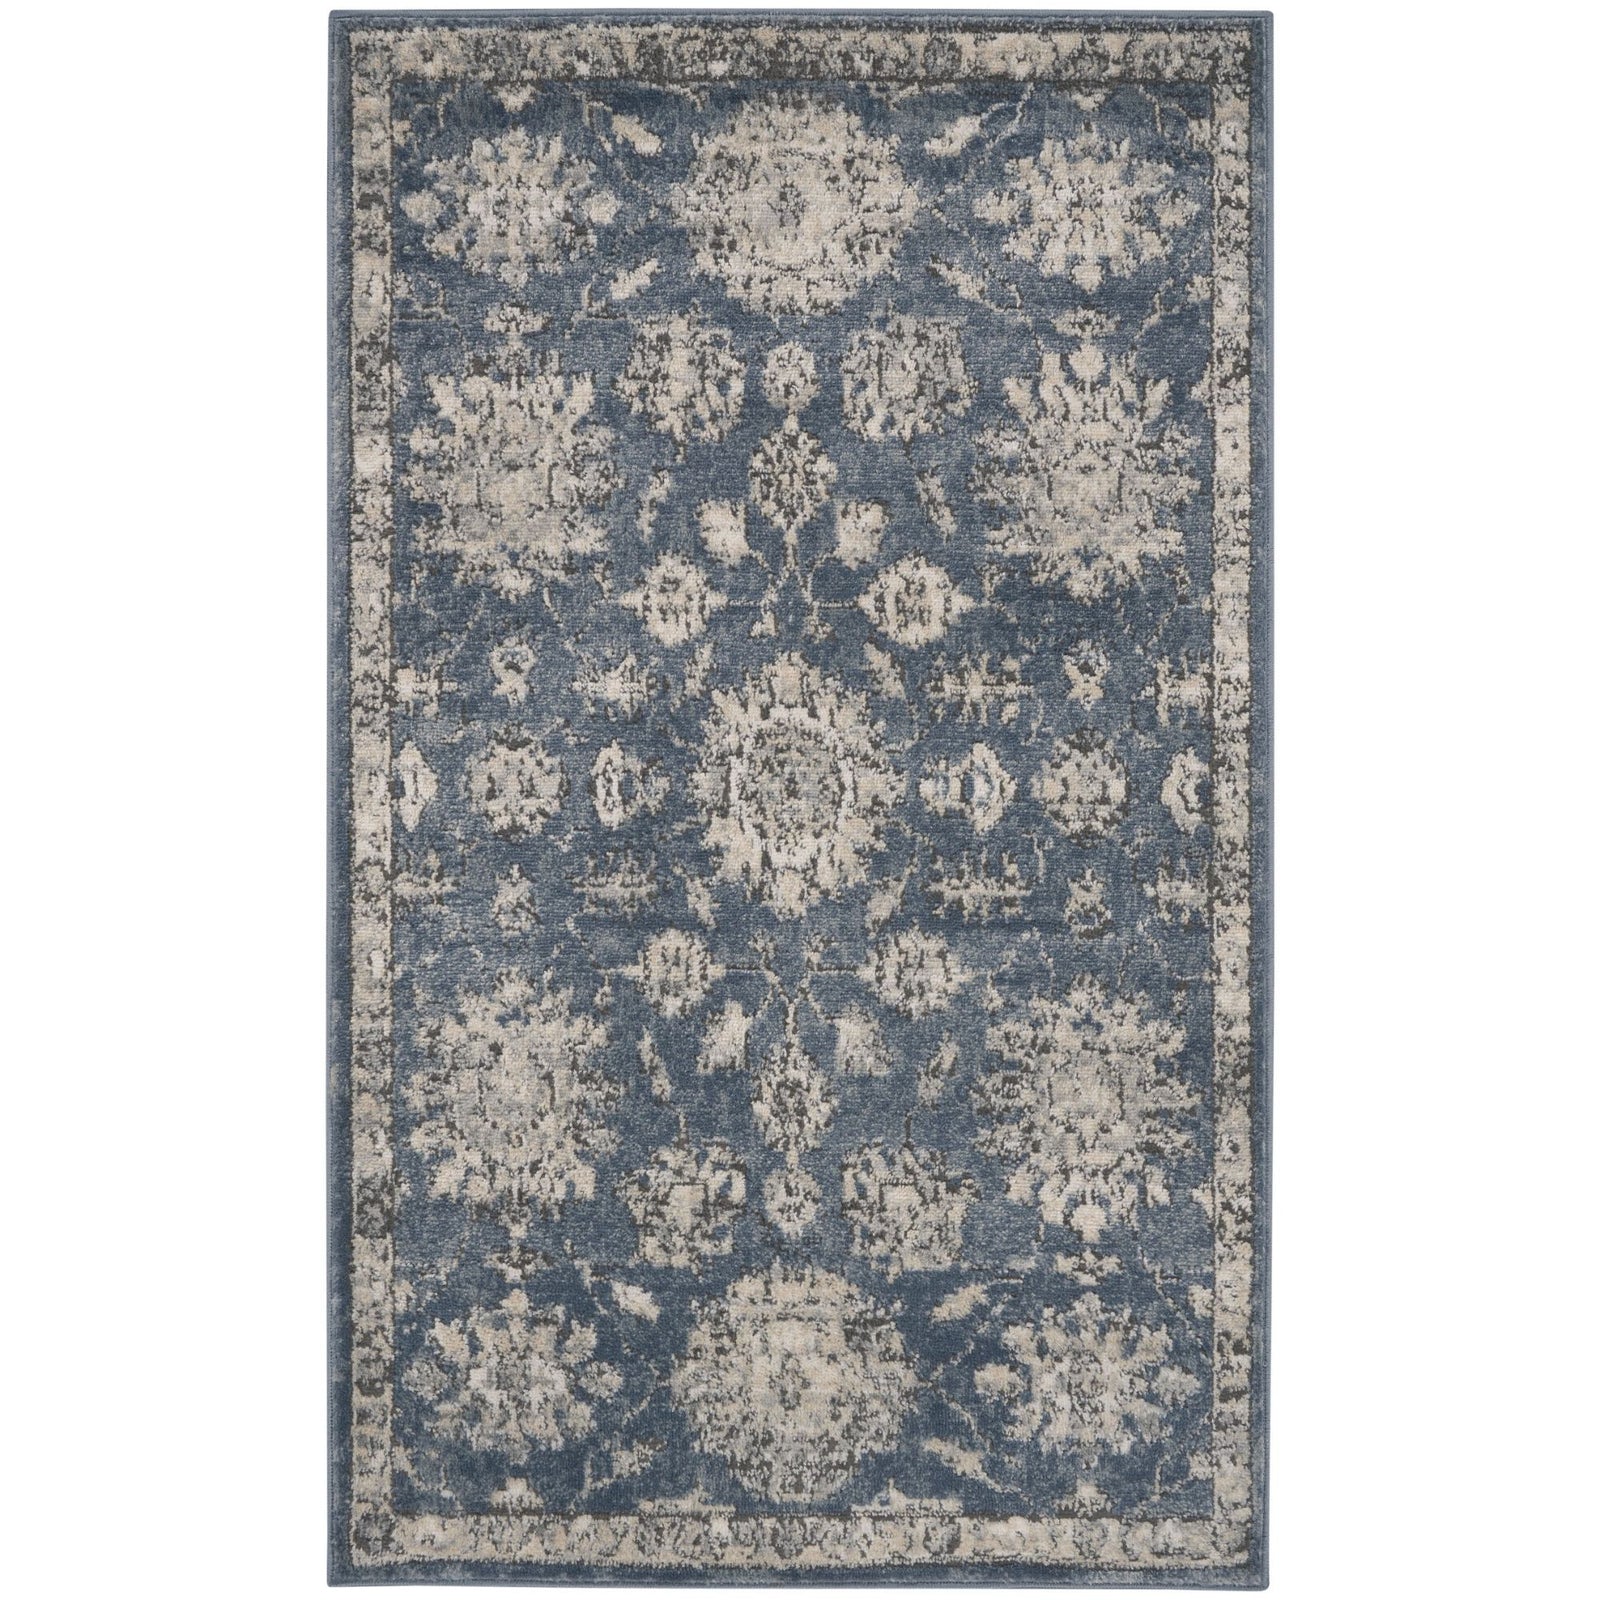 3' X 5' Blue And Beige Oriental Power Loom Non Skid Area Rug